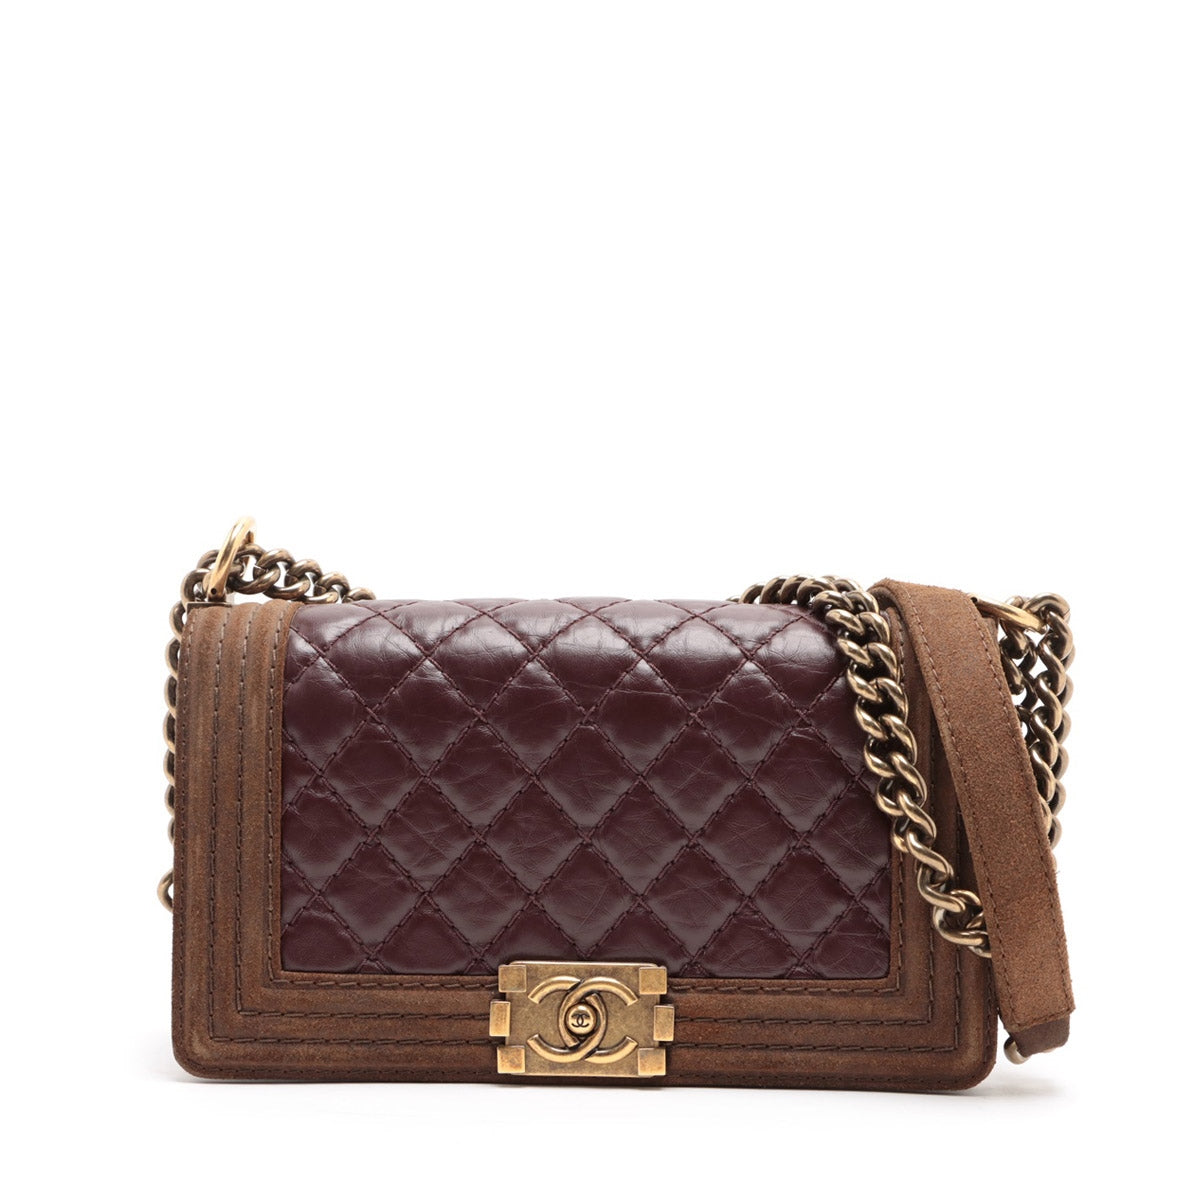 Chanel Boy Chanel Leather & suede Chain shoulder bag Bordeaux x brown Gold Metal fittings 18189566